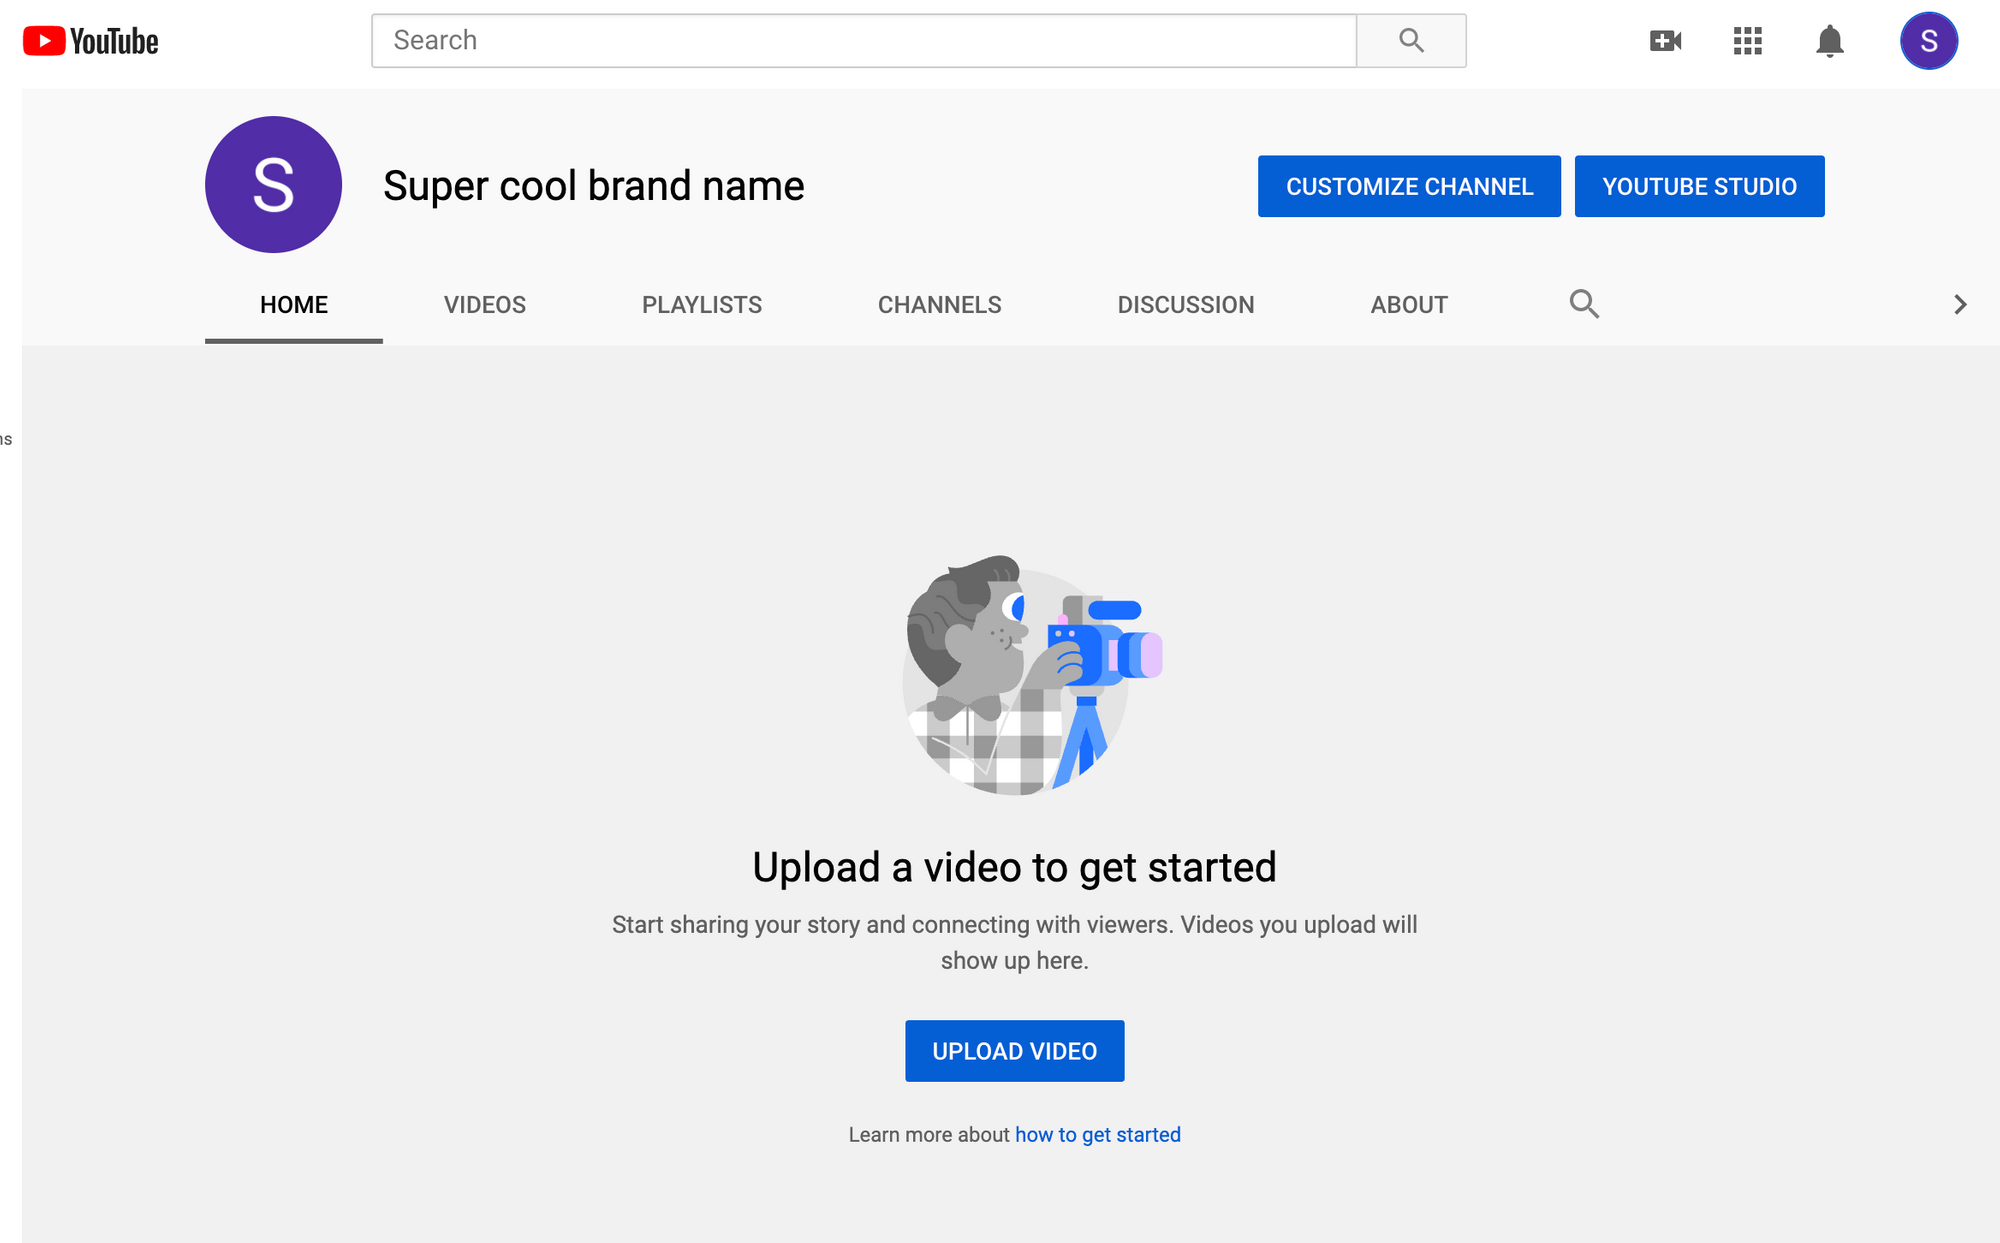 YouTube channel: Getting started from scratch? Click the Customize Channel button